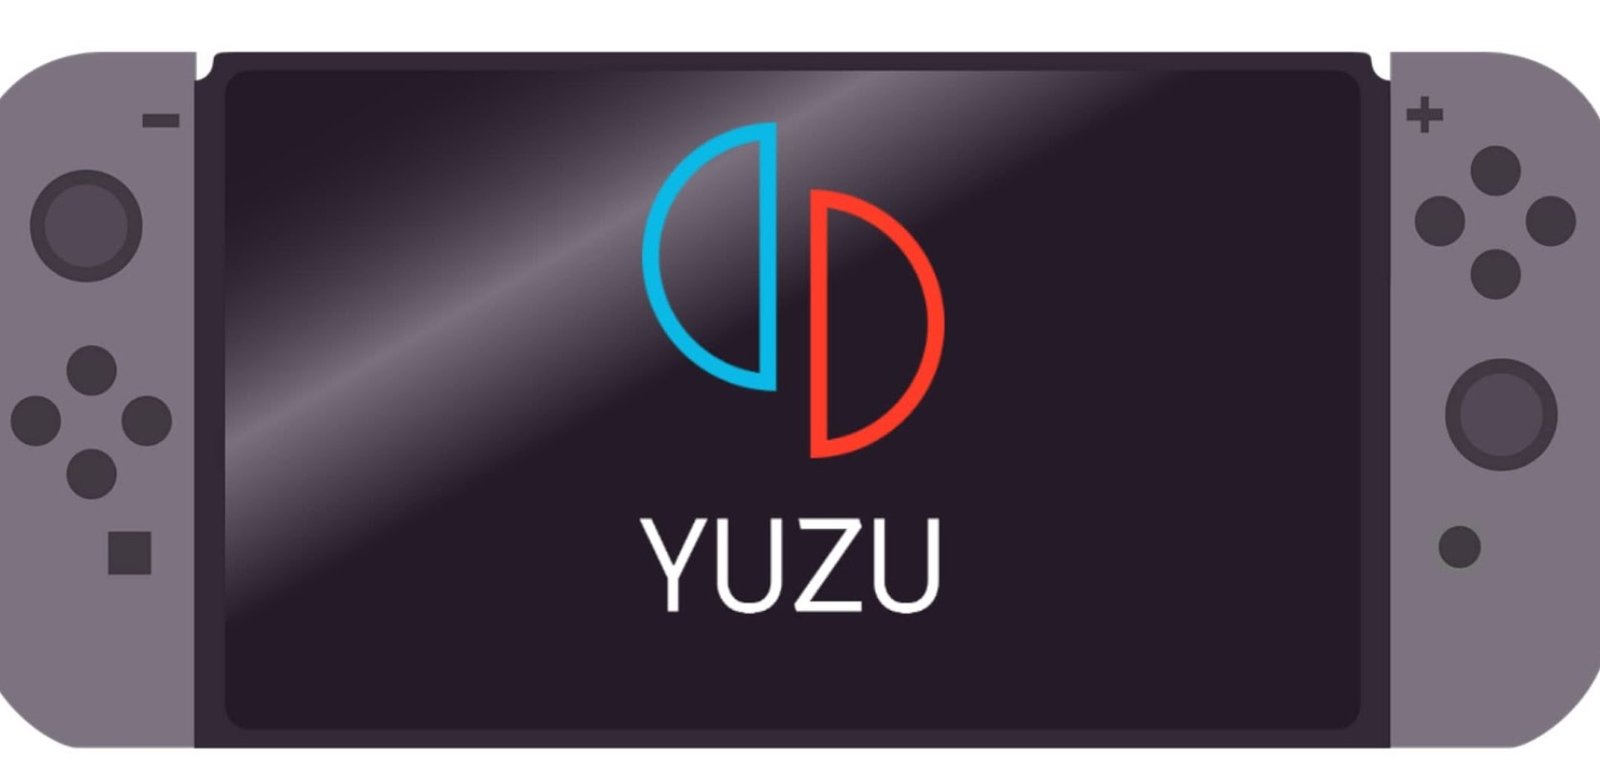 Yuzu Emulator Faces Legal Battle With Nintendo Over Switch Piracy